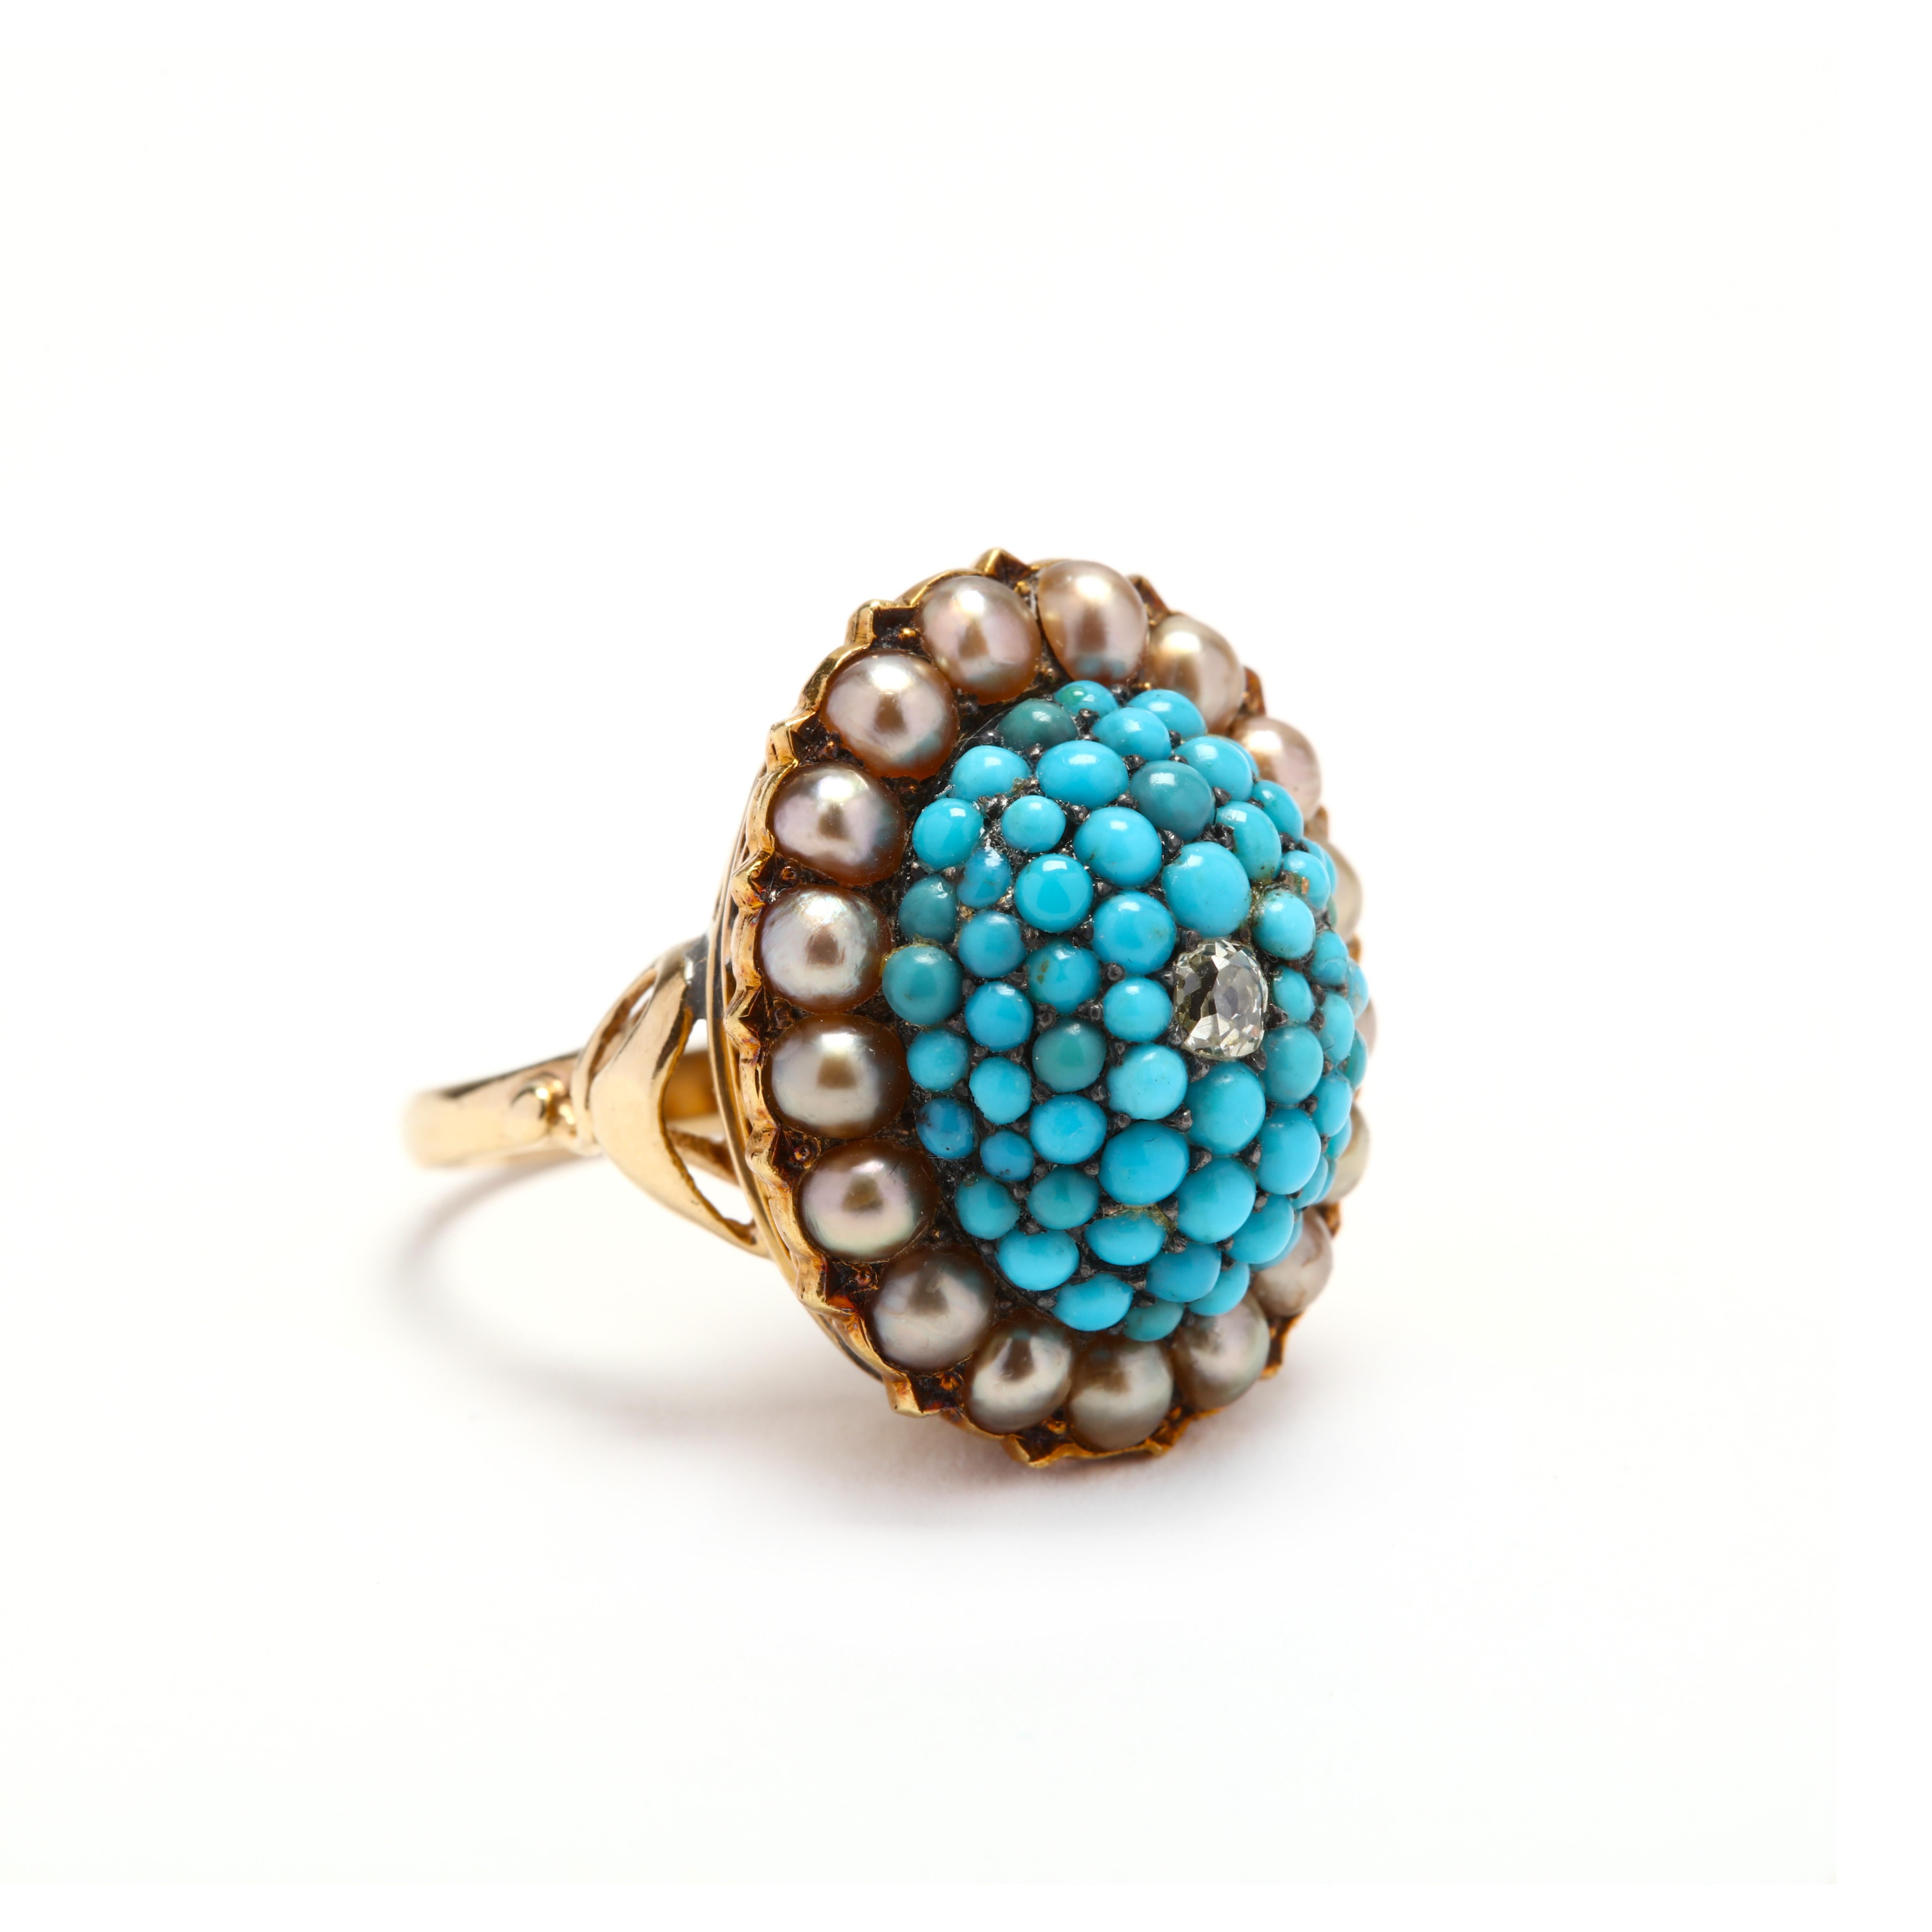 A Victorian 14 karat yellow gold bombe ring with a diamond, turquoise, and pearls. Centered on an old European cut diamond, surrounded by round cabochon cut turquoise stones and a halo of split pearls.

Stones:
- diamond, 1 stone
- old European